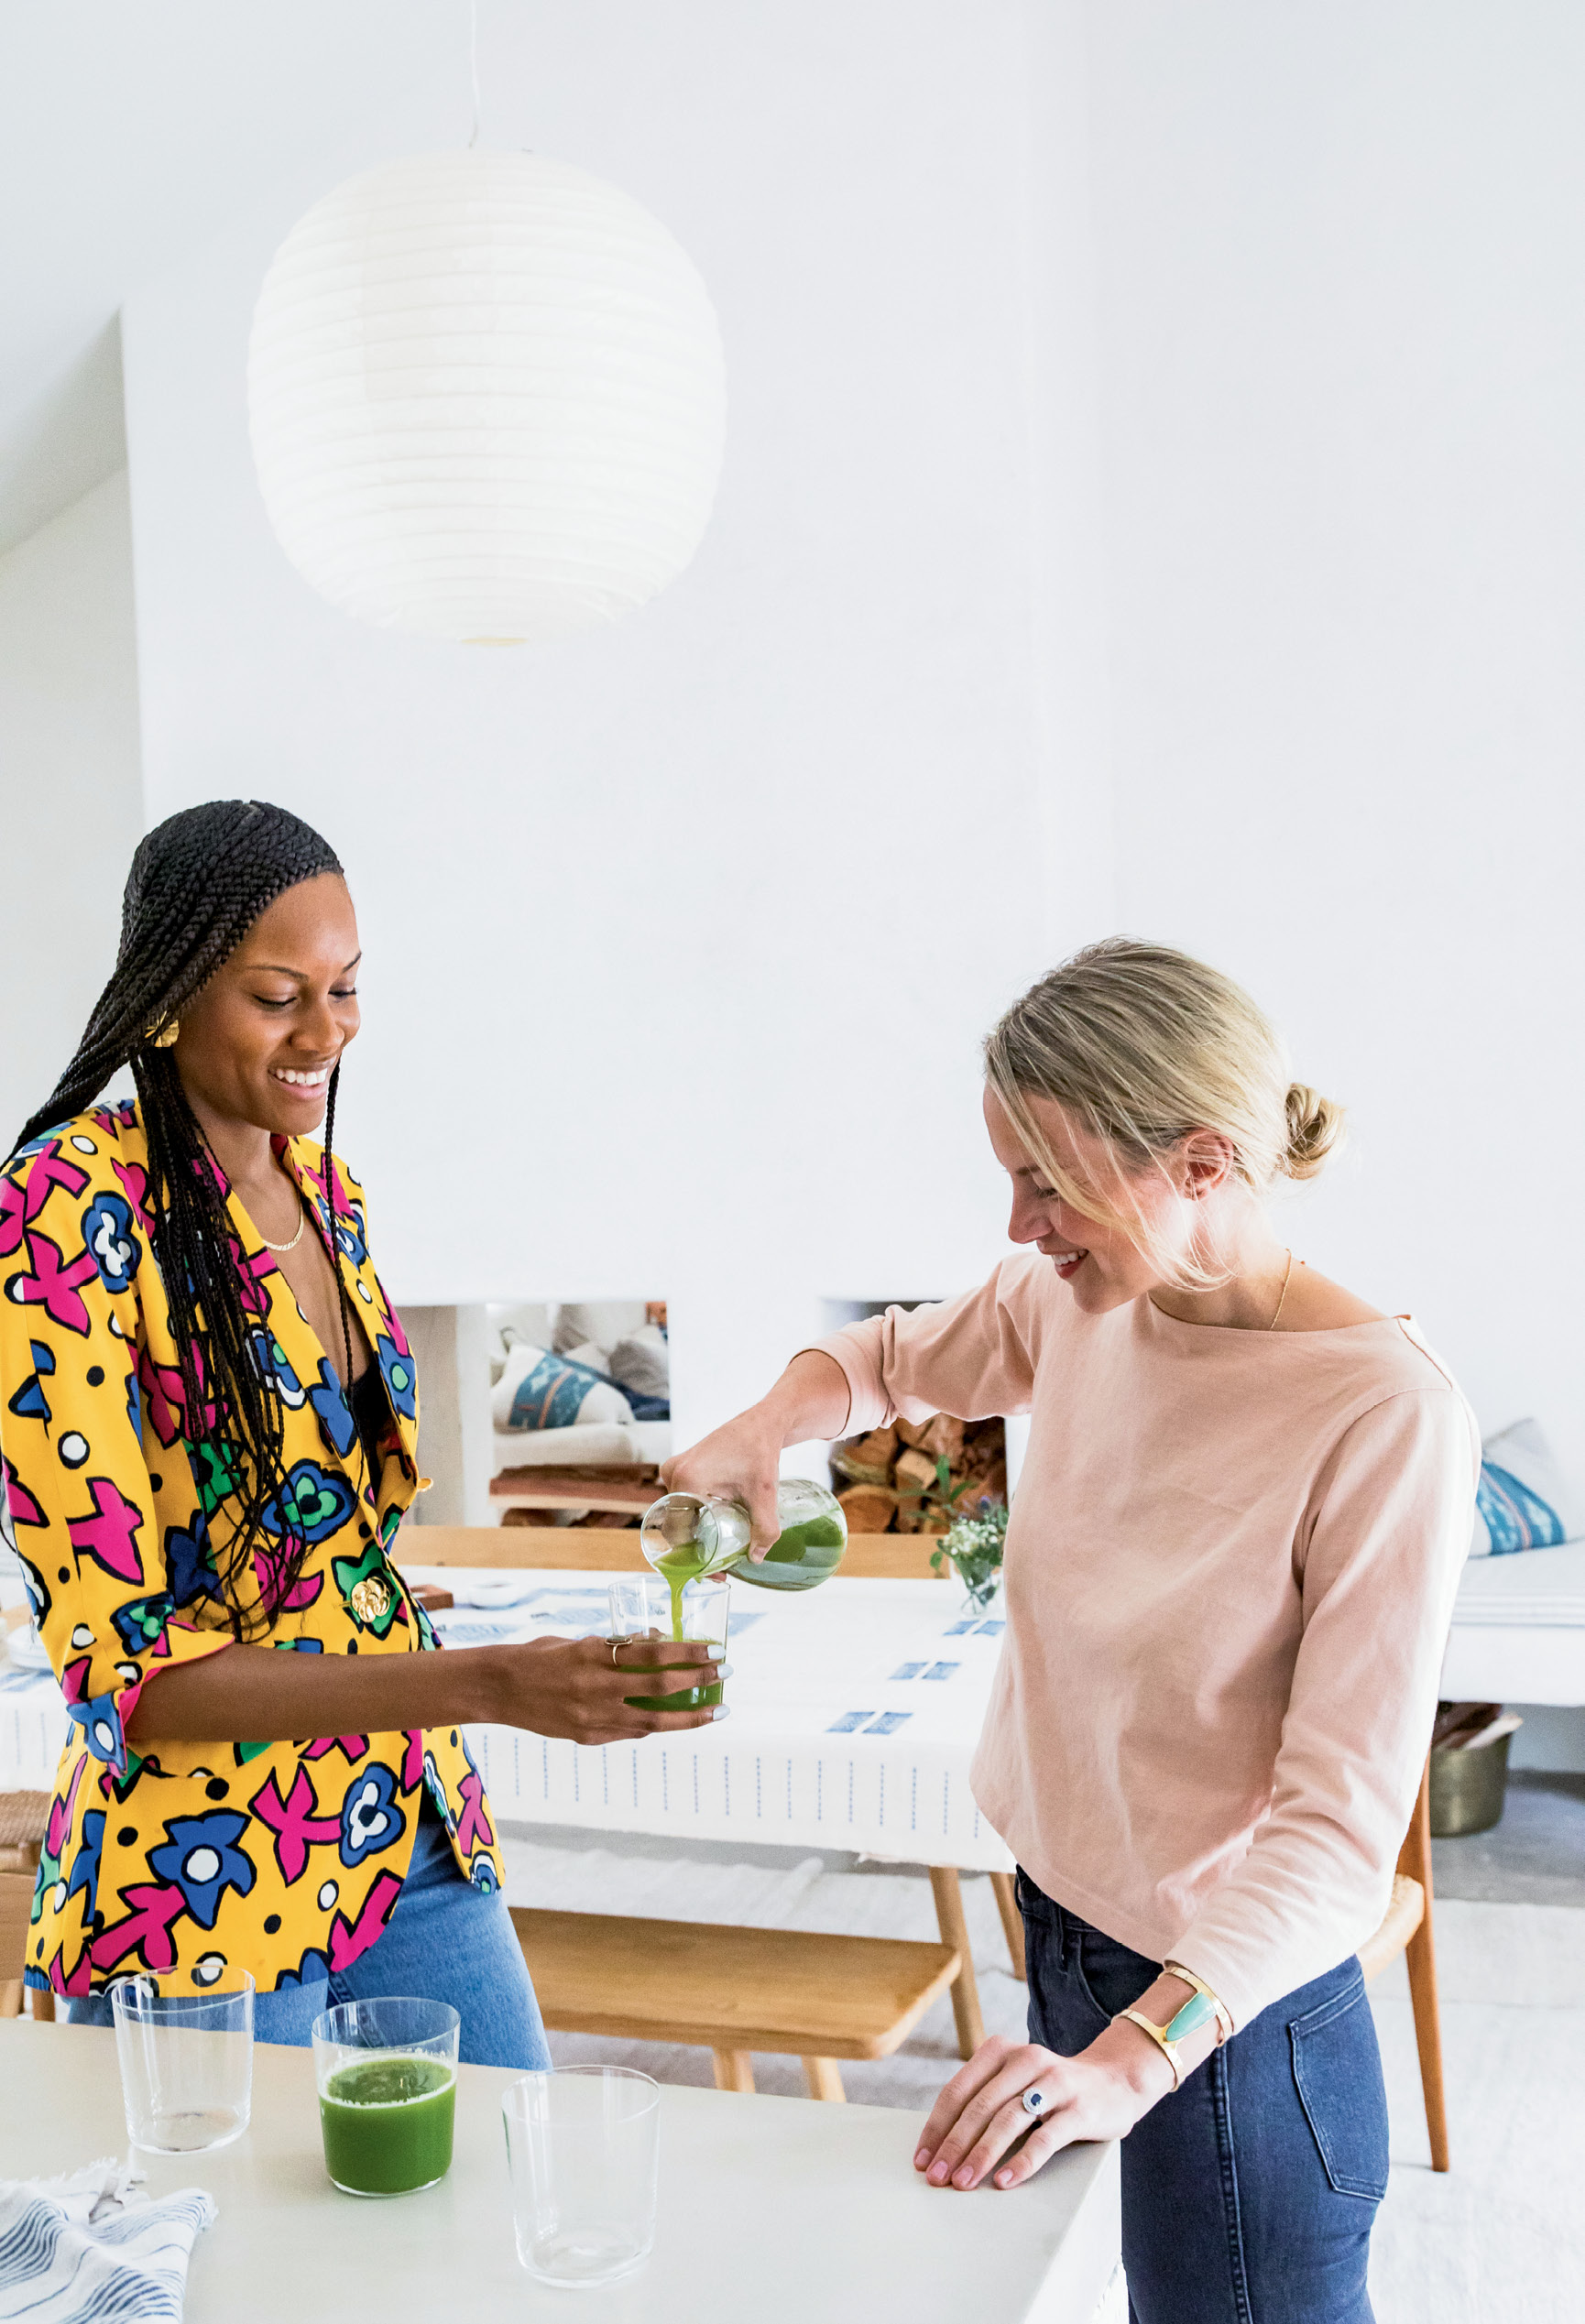 including Sabrina Hyman (left), cofounder of Ill Vibe The Tribe artist collective, and Kate Towill (right), co-owner of Basic Kitchen, who brought the restaurant’s freshly pressed Apples to Apples juice.